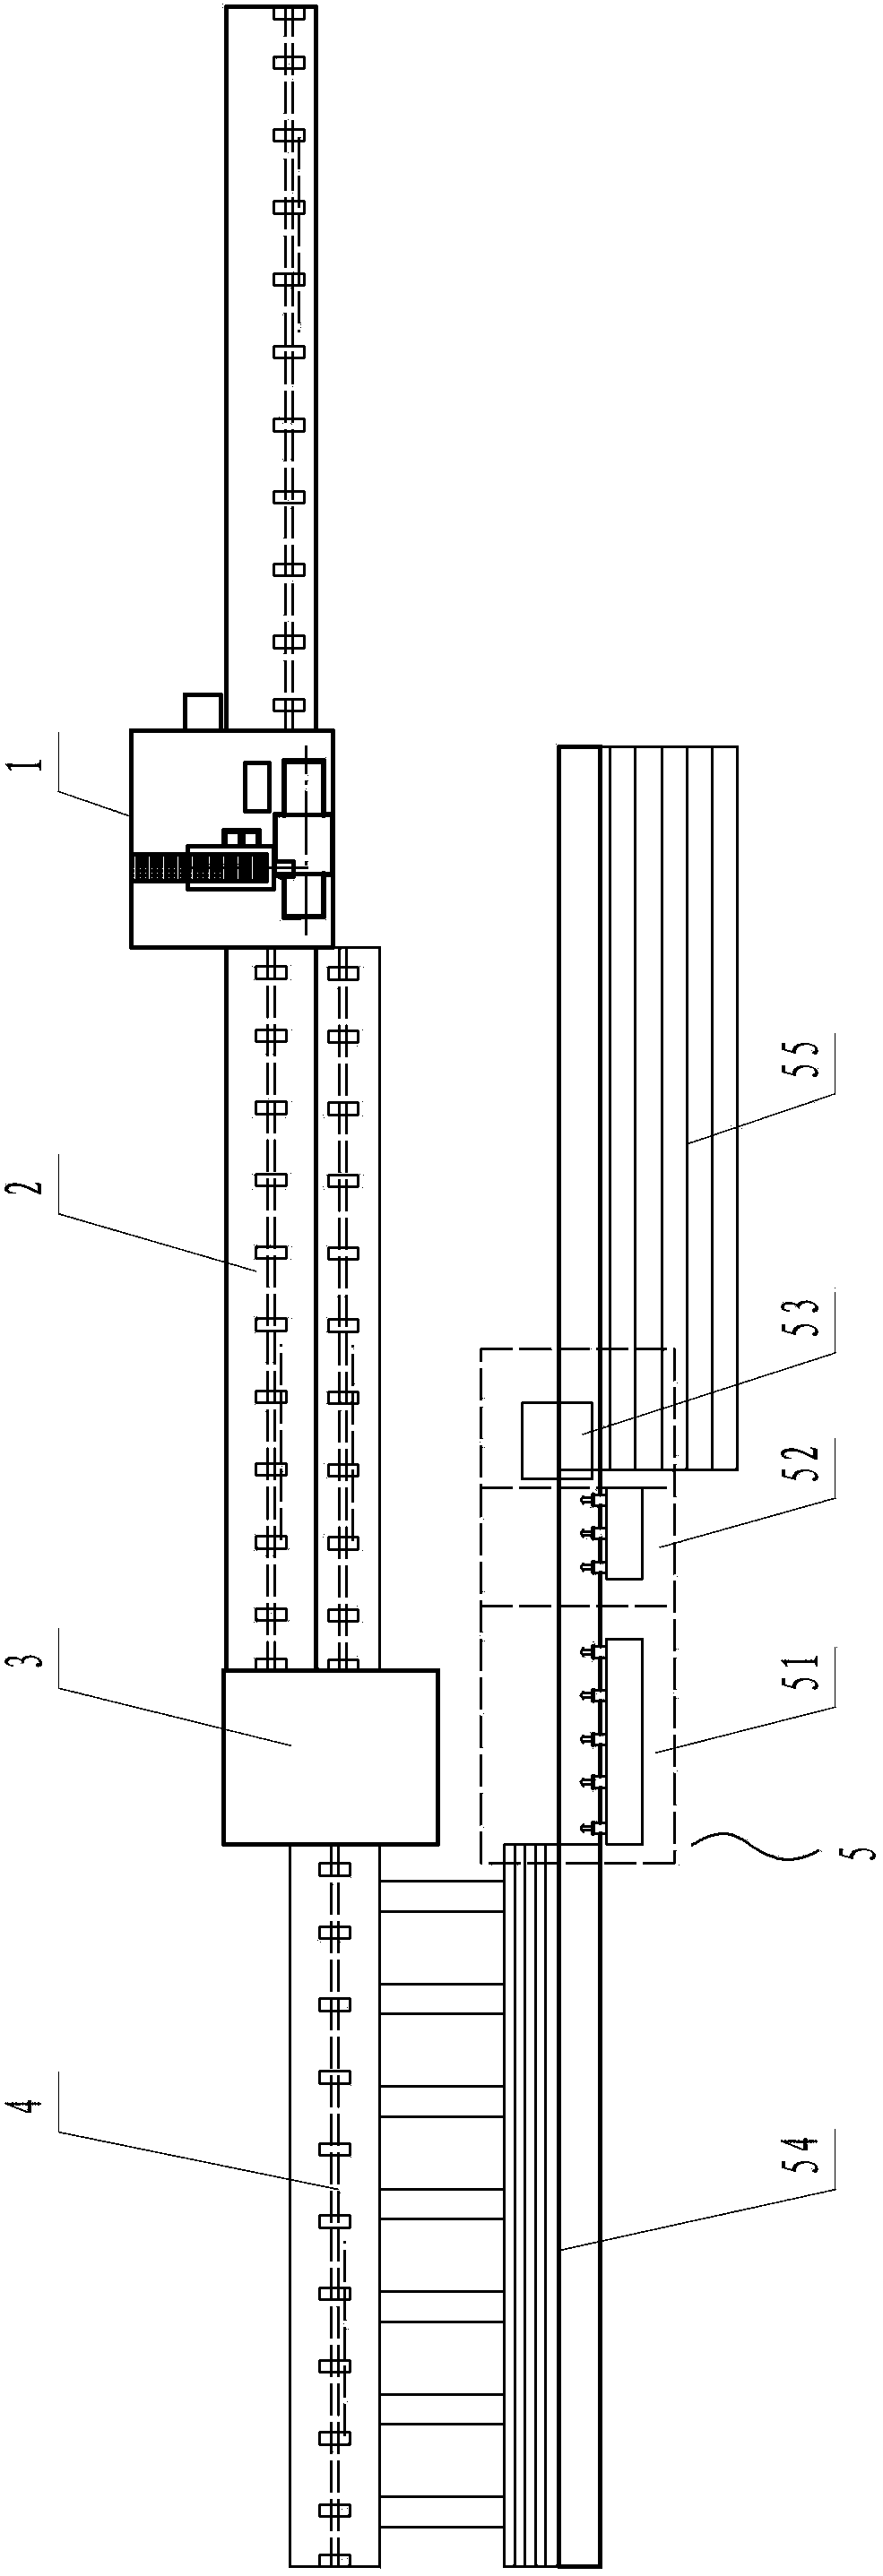 Semiautomatic streamline type production system and method for high-strength threaded steel bar